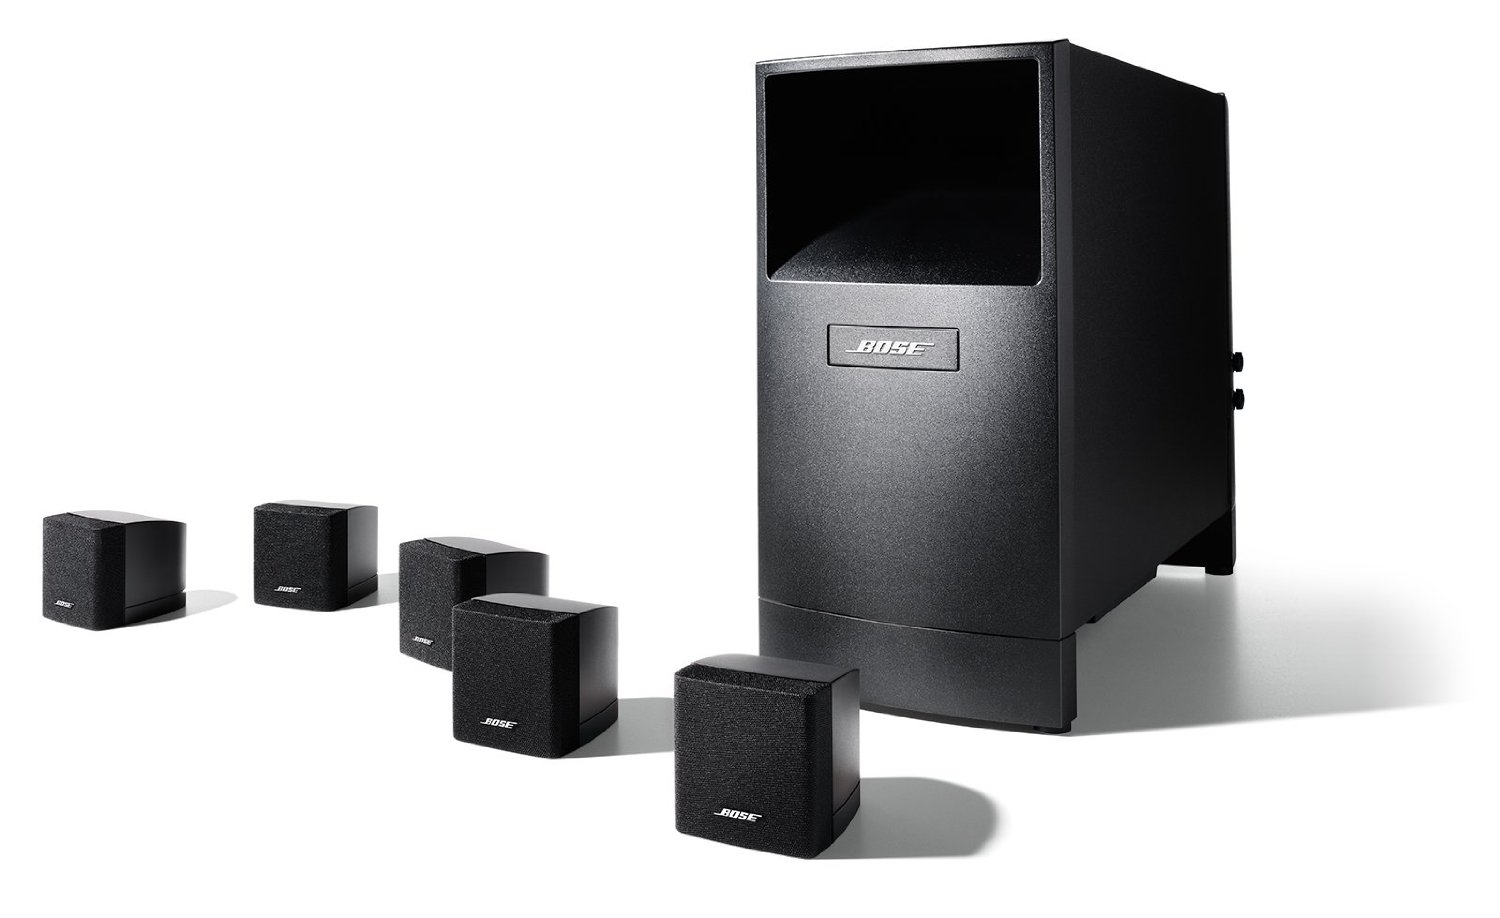 Upgrade your home theater system w/ this Bose Acoustimass speaker set for $369 shipped (Reg. $400+)